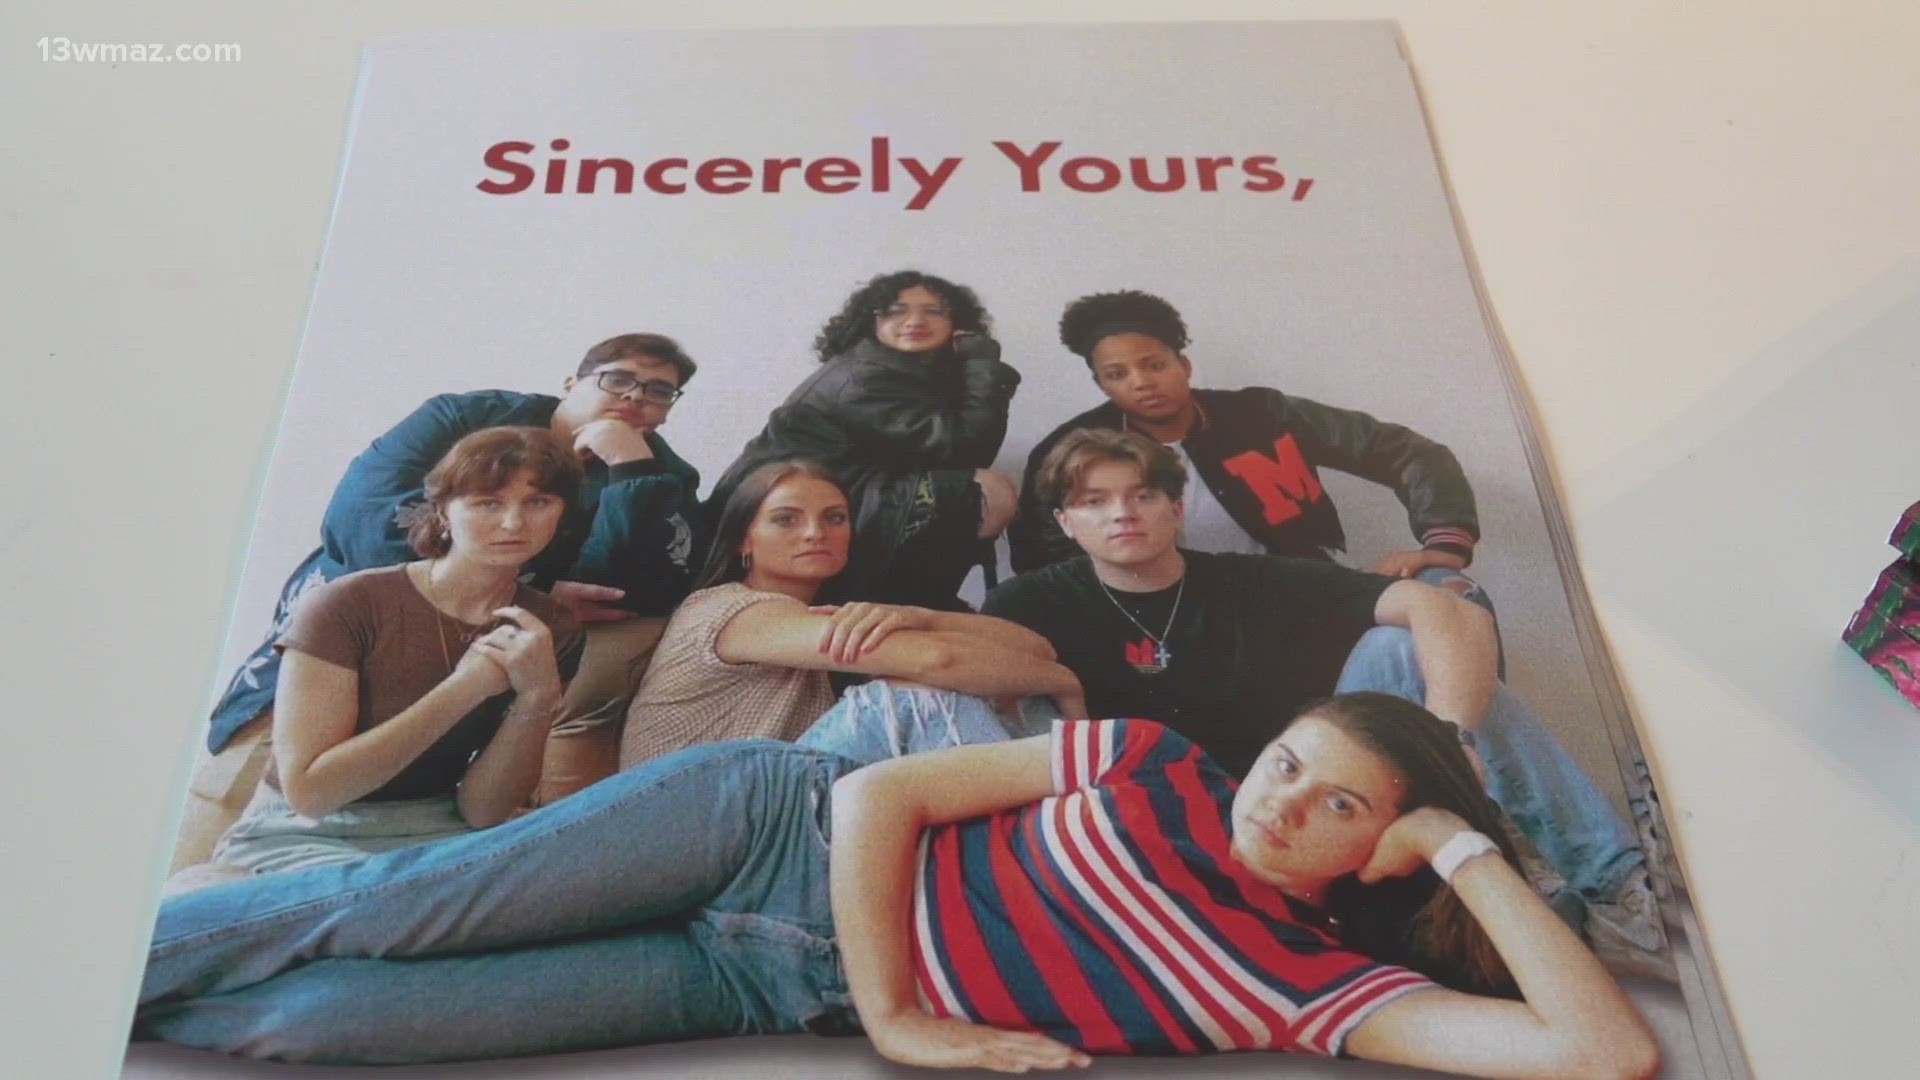 Mercer seniors are making sure you 'don't forget about them' during the newest exhibition at the McEachern Art Center, titled 'Sincerely, Yours'.